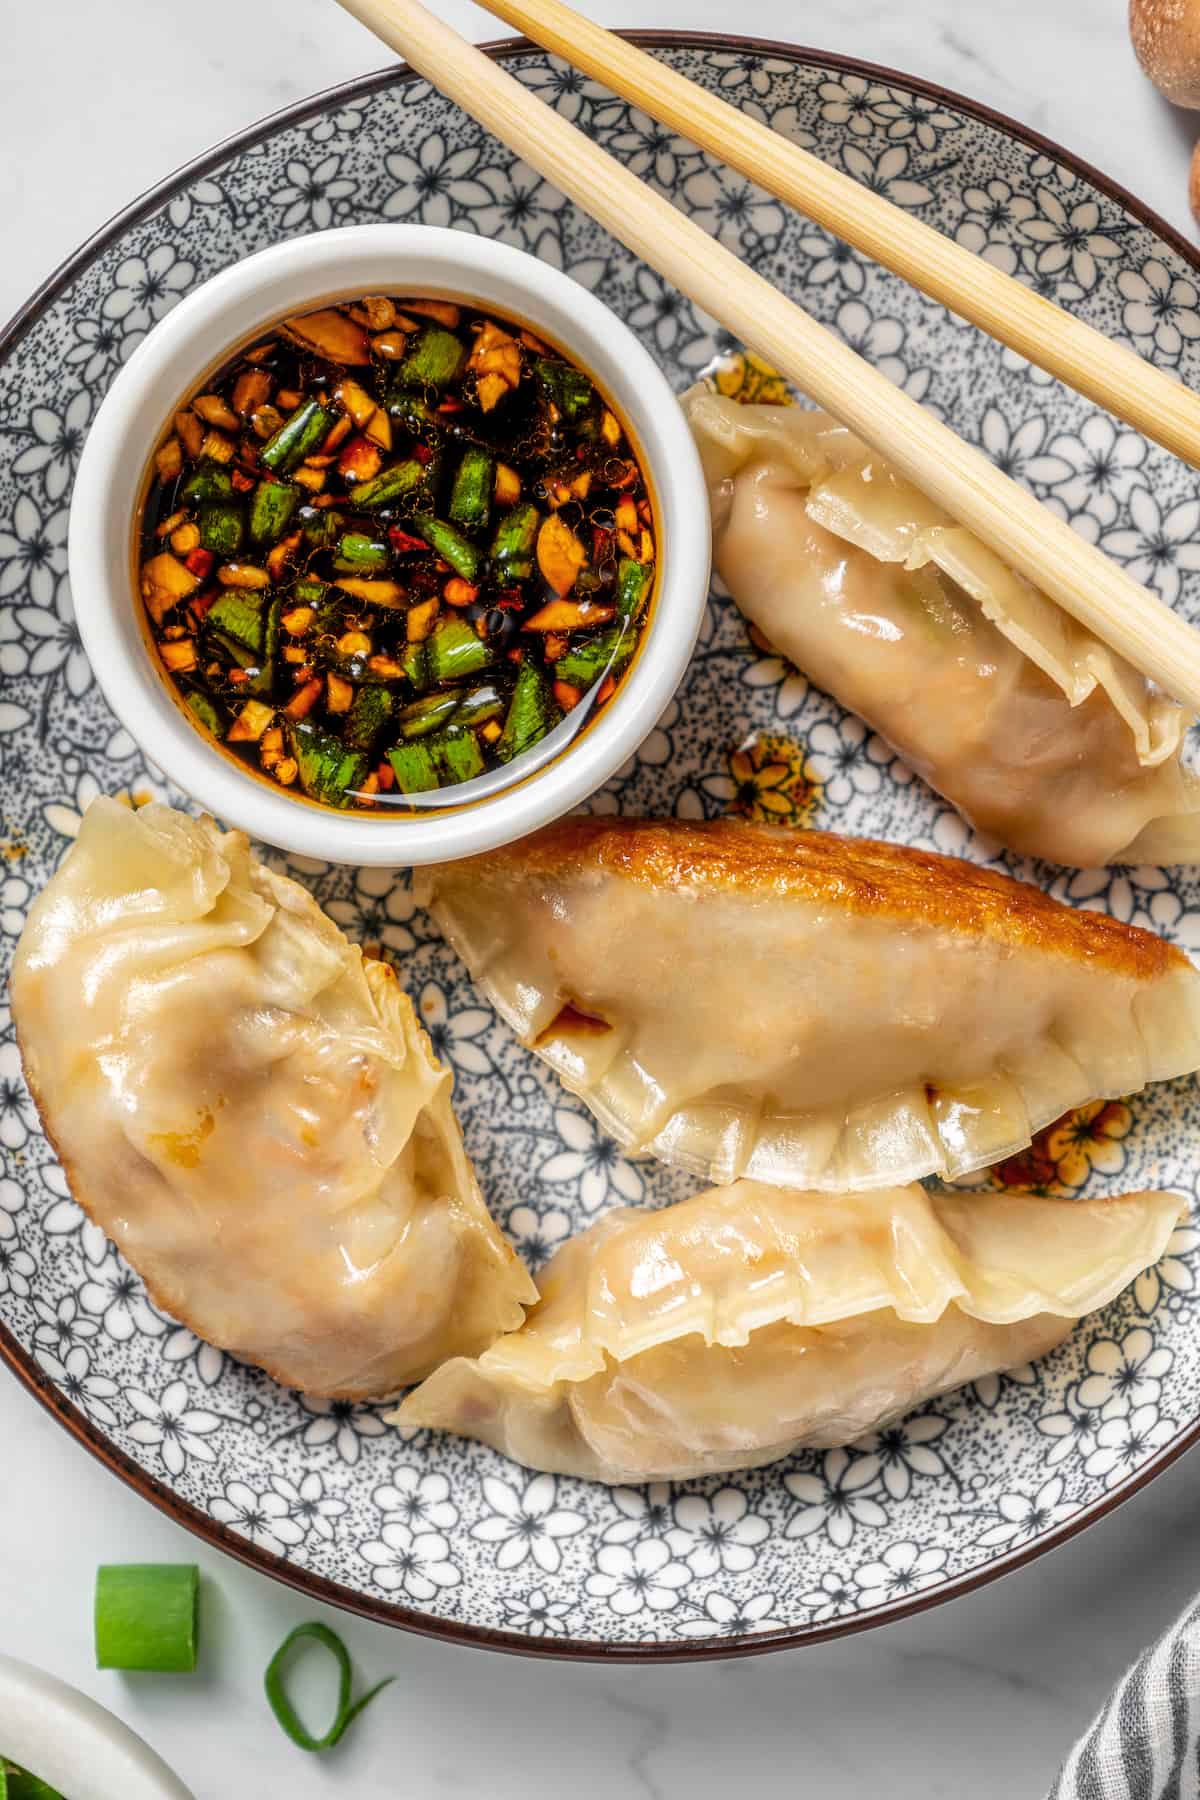 Overhead view of vegan dumplings on plate with dipping sauce and chopsticks